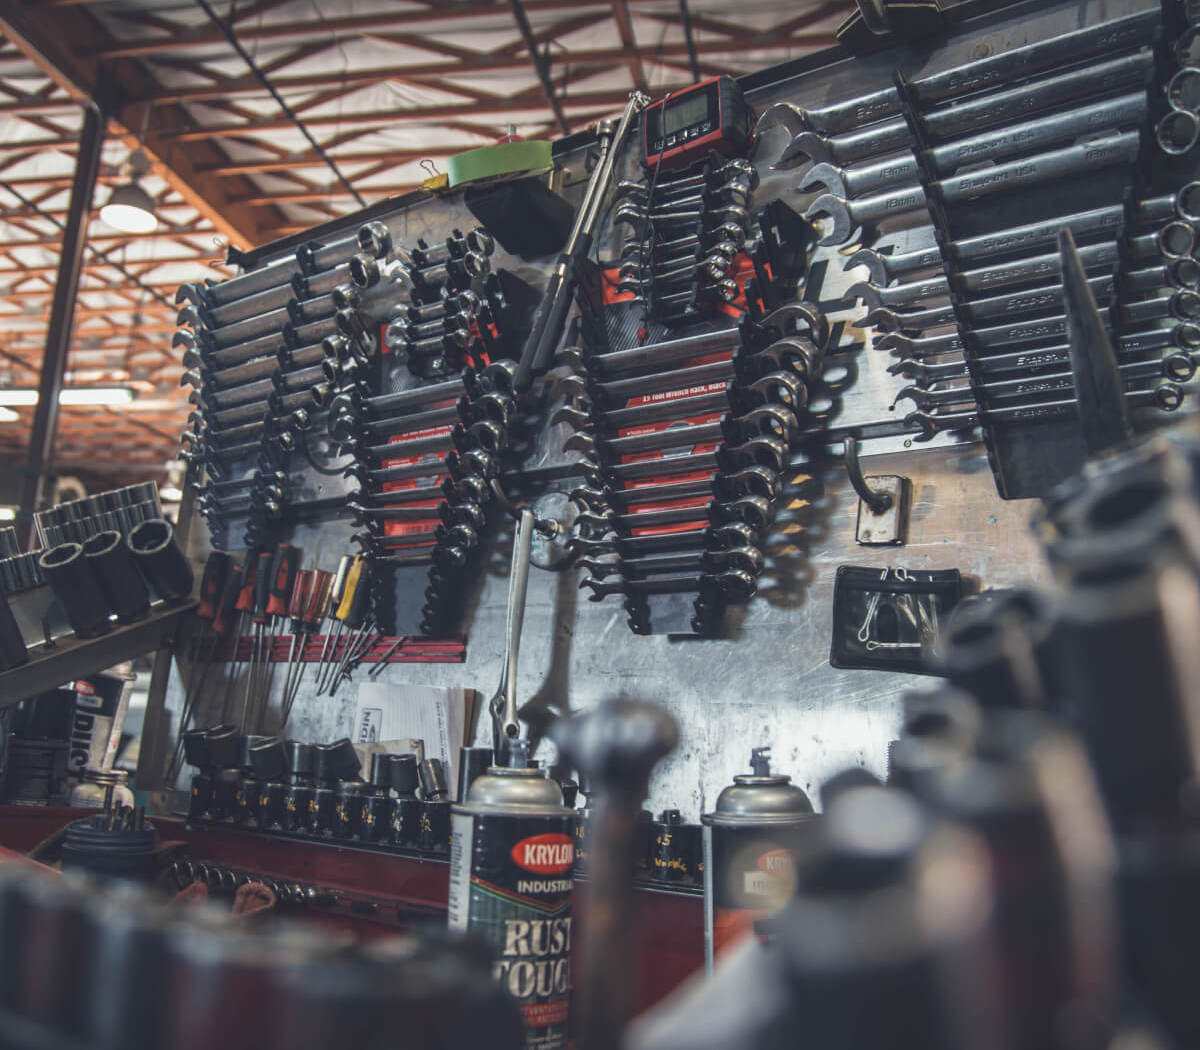 5 auto repair marketing ideas to capture leads and loyalty.